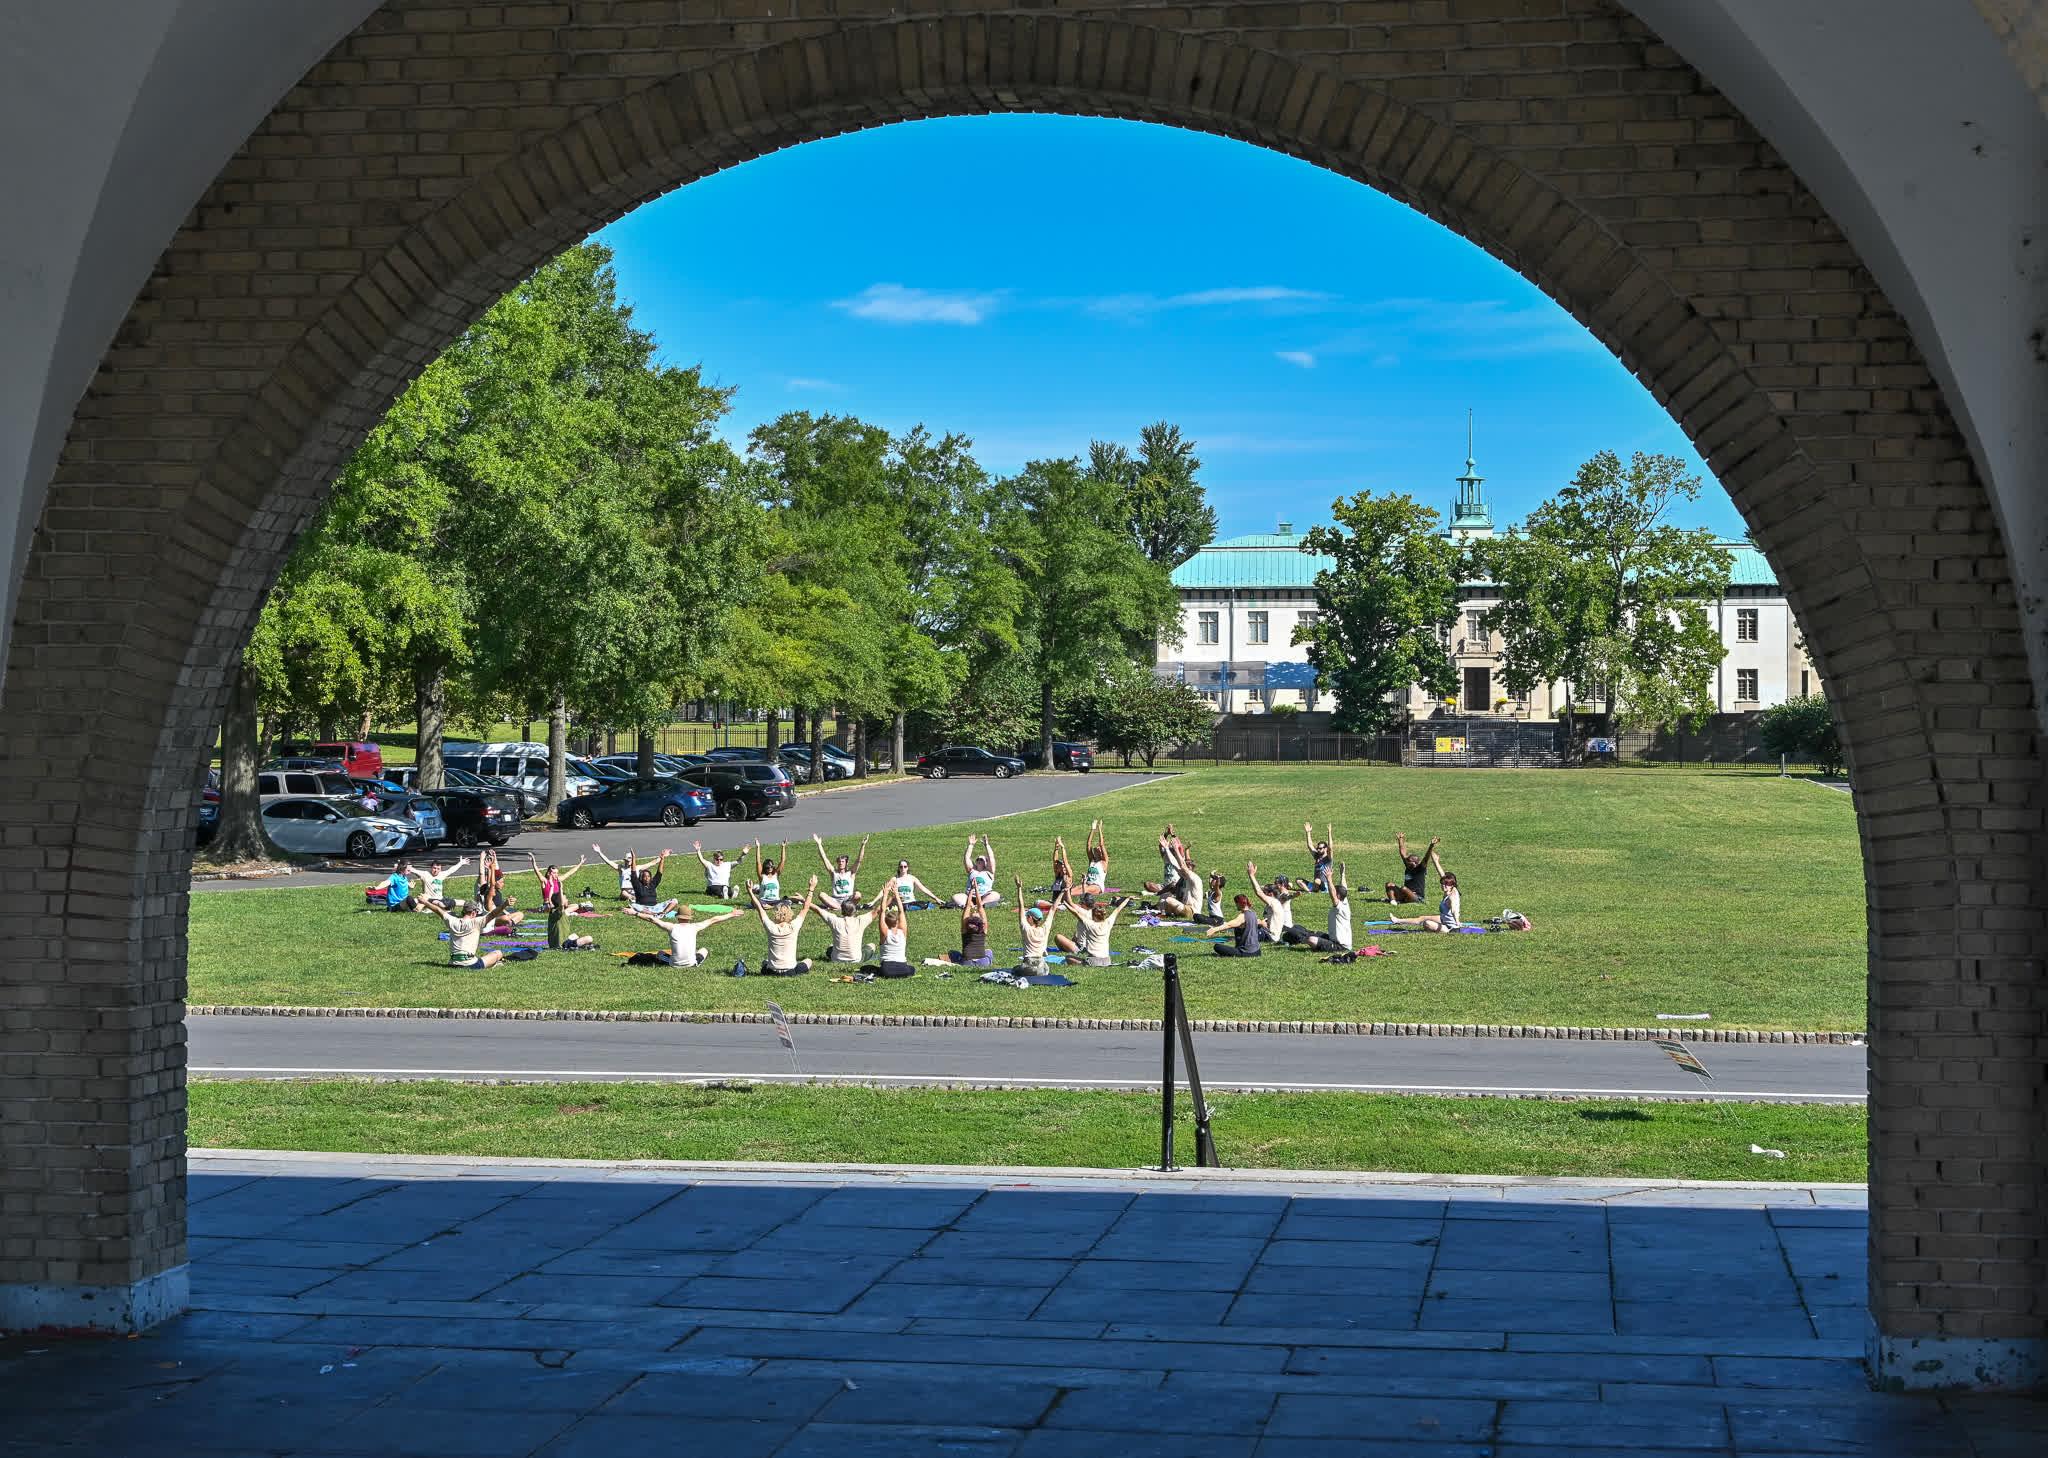 Distant view from under brick arch structure of people doing Yoga with legs crossed and arms in the air.